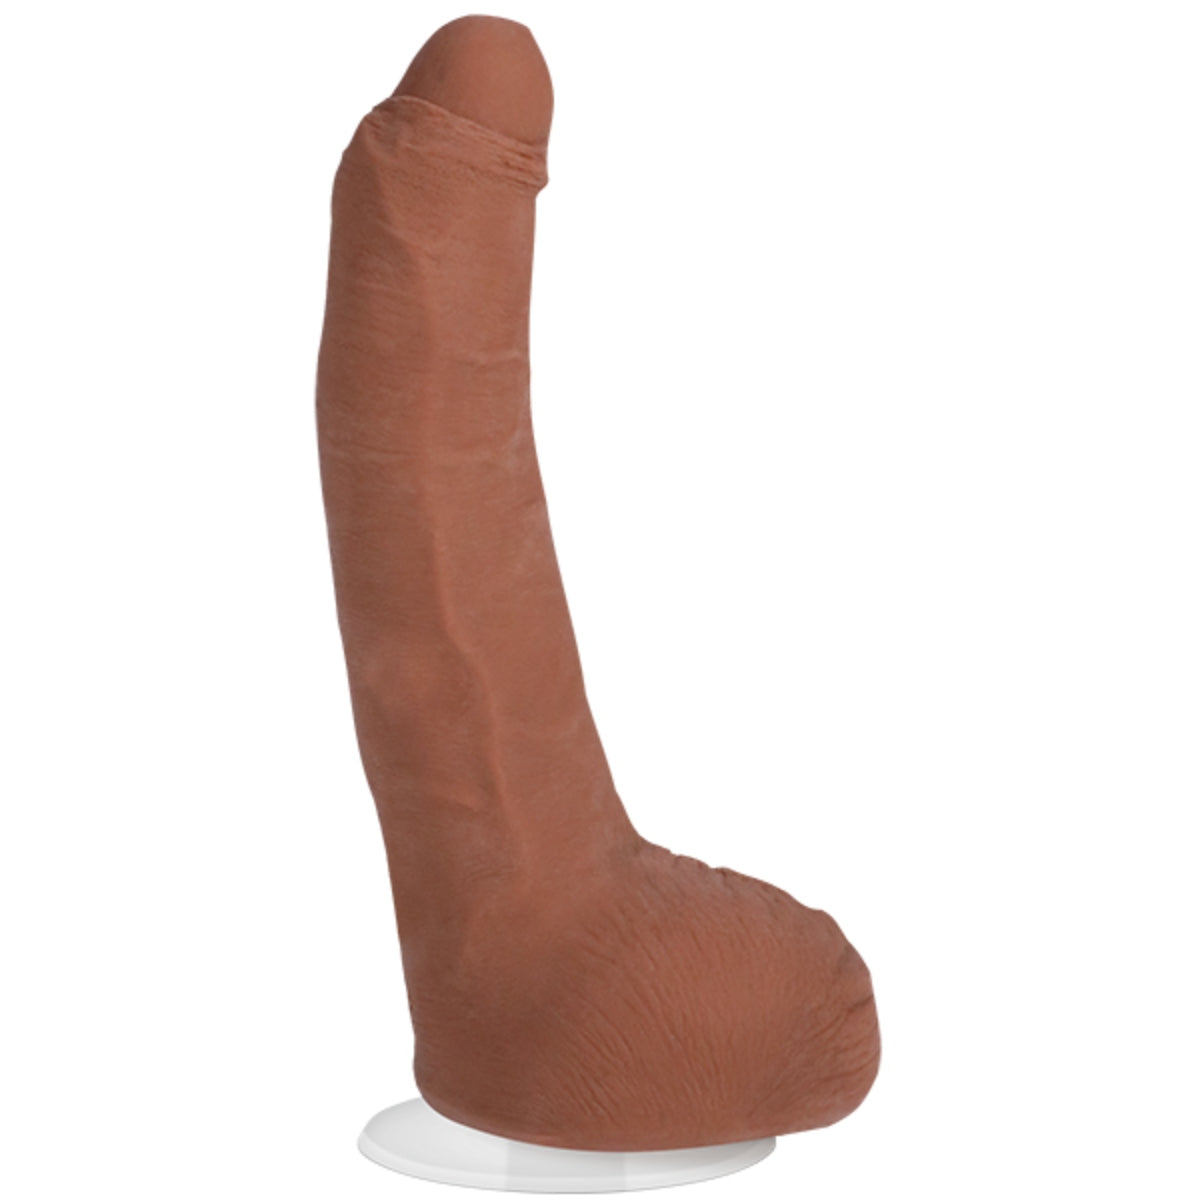 Suction Base Dildos Signature Cocks Leo Vice 6 Inch Ultraskyn Cock with Removable Vac-U-Lock Suction Cup   